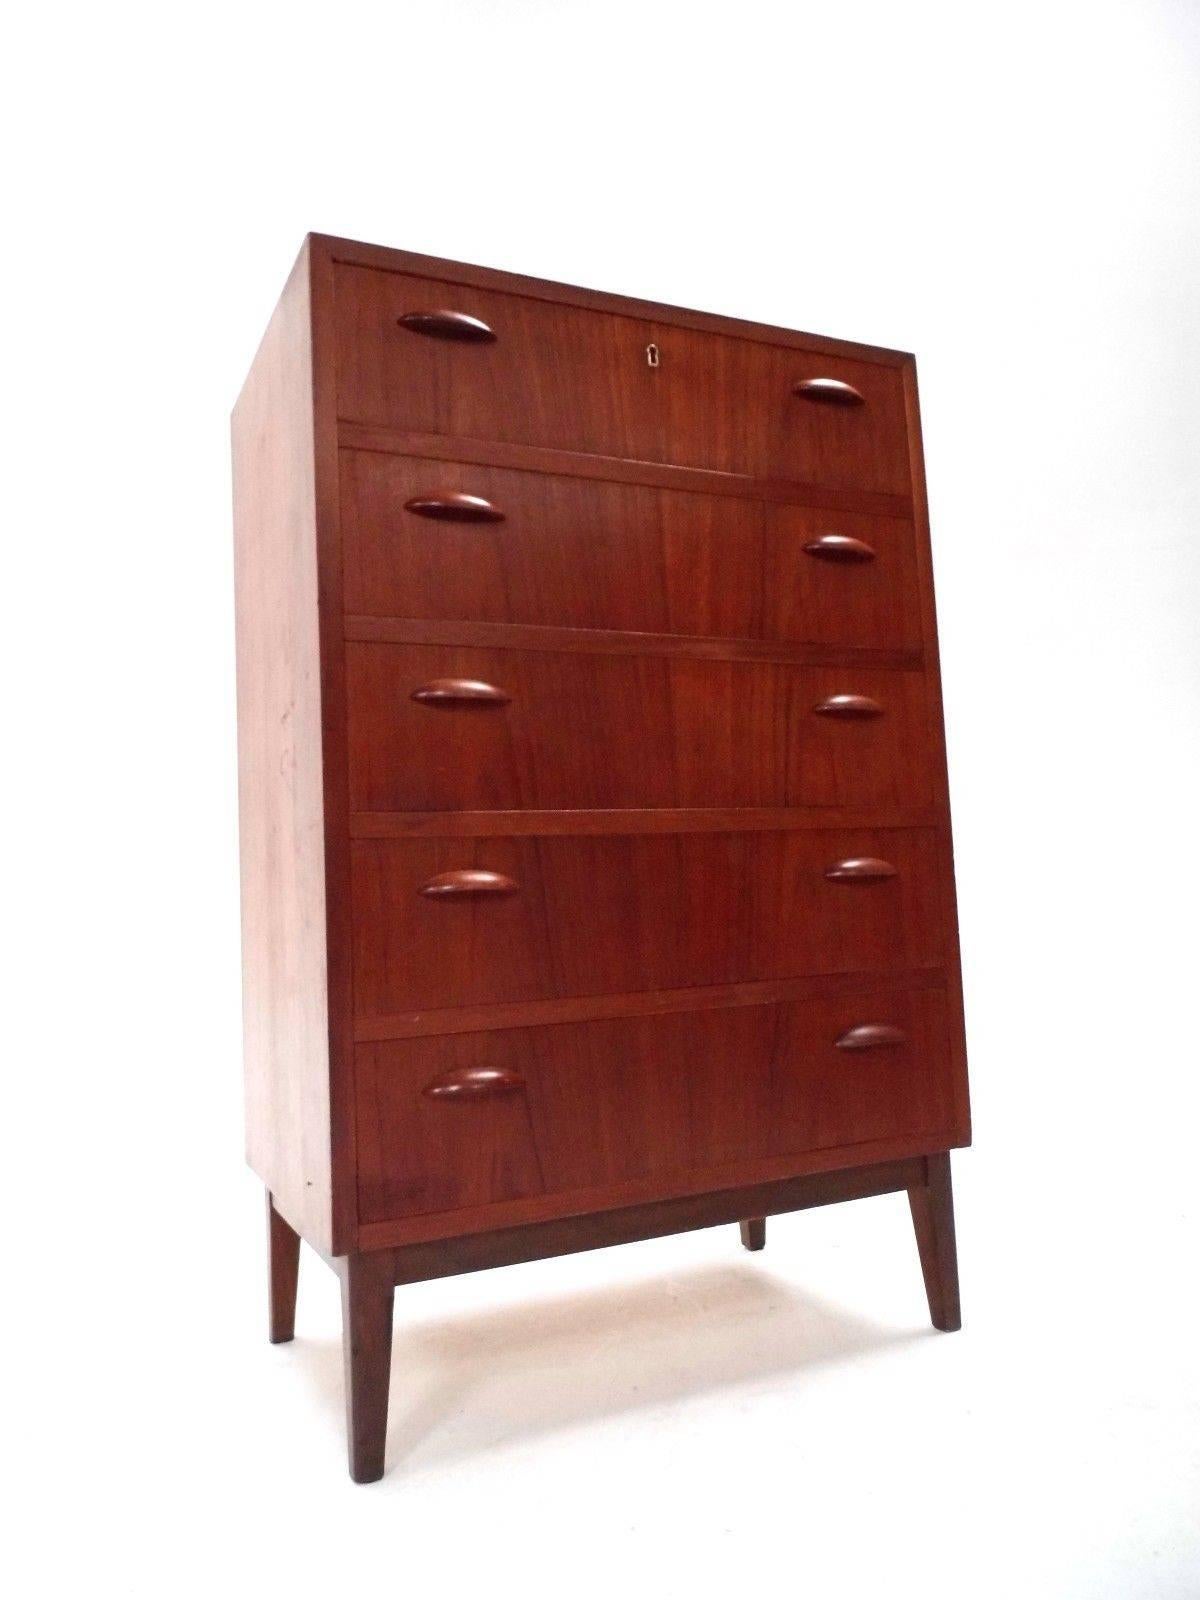 A beautiful Danish teak tallboy chest of drawers, this would make a stylish addition to any bedroom area. The chest has five drawers, all are in good working order with sculptured wooden handles. A striking piece of classically designed Scandinavian